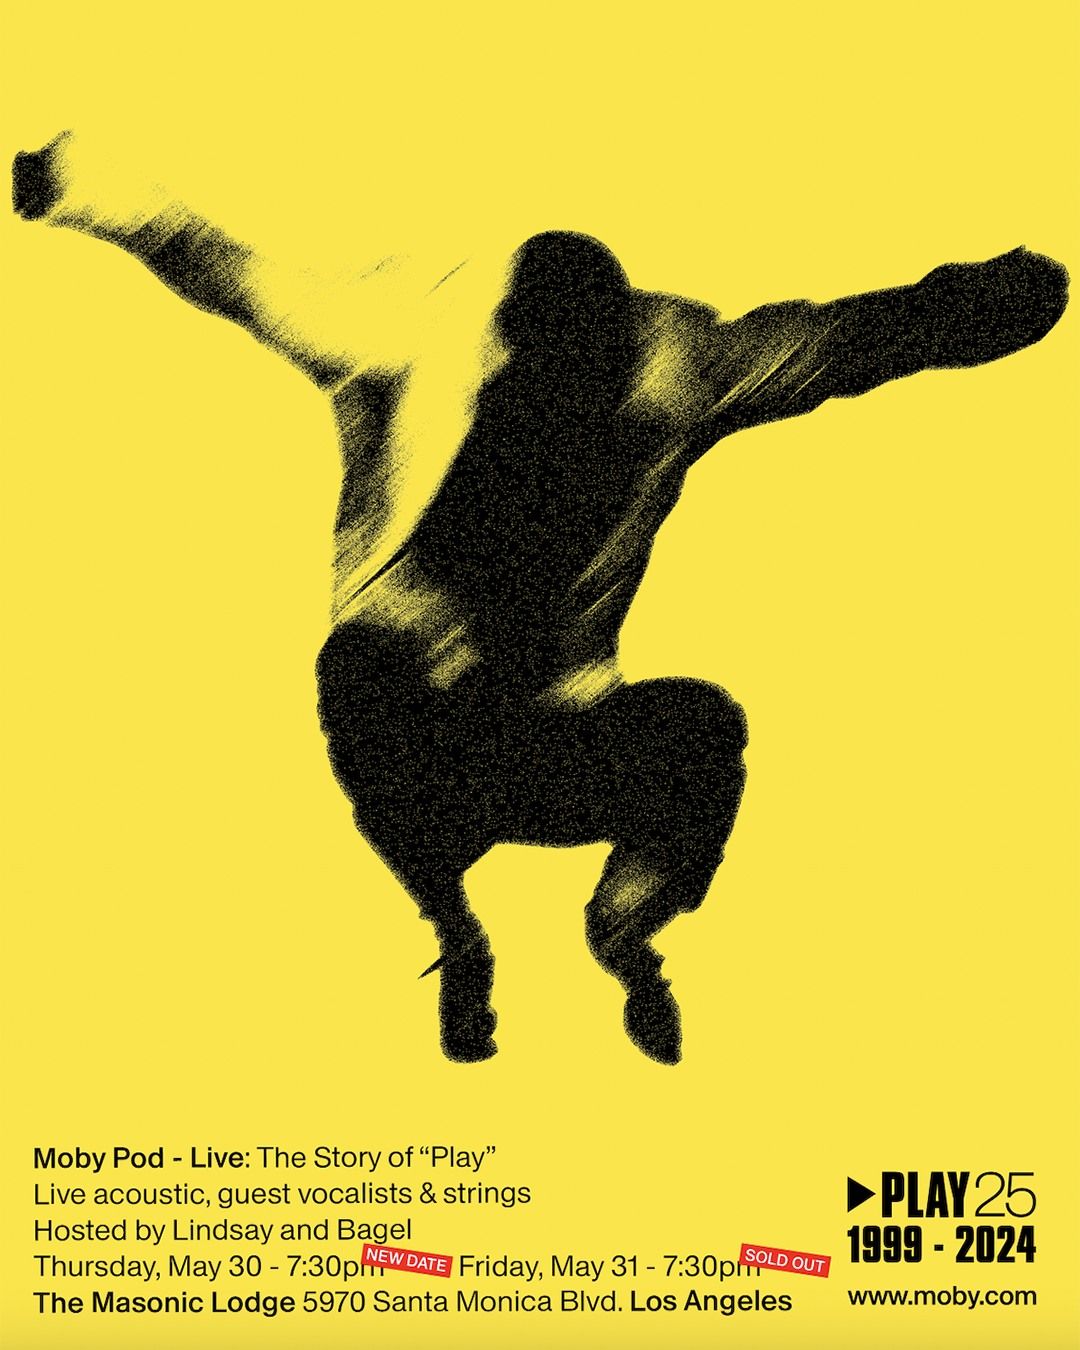 Moby Pod Live - The Story of \u2018Play\u2019 - Live acoustic, guest vocalists & strings